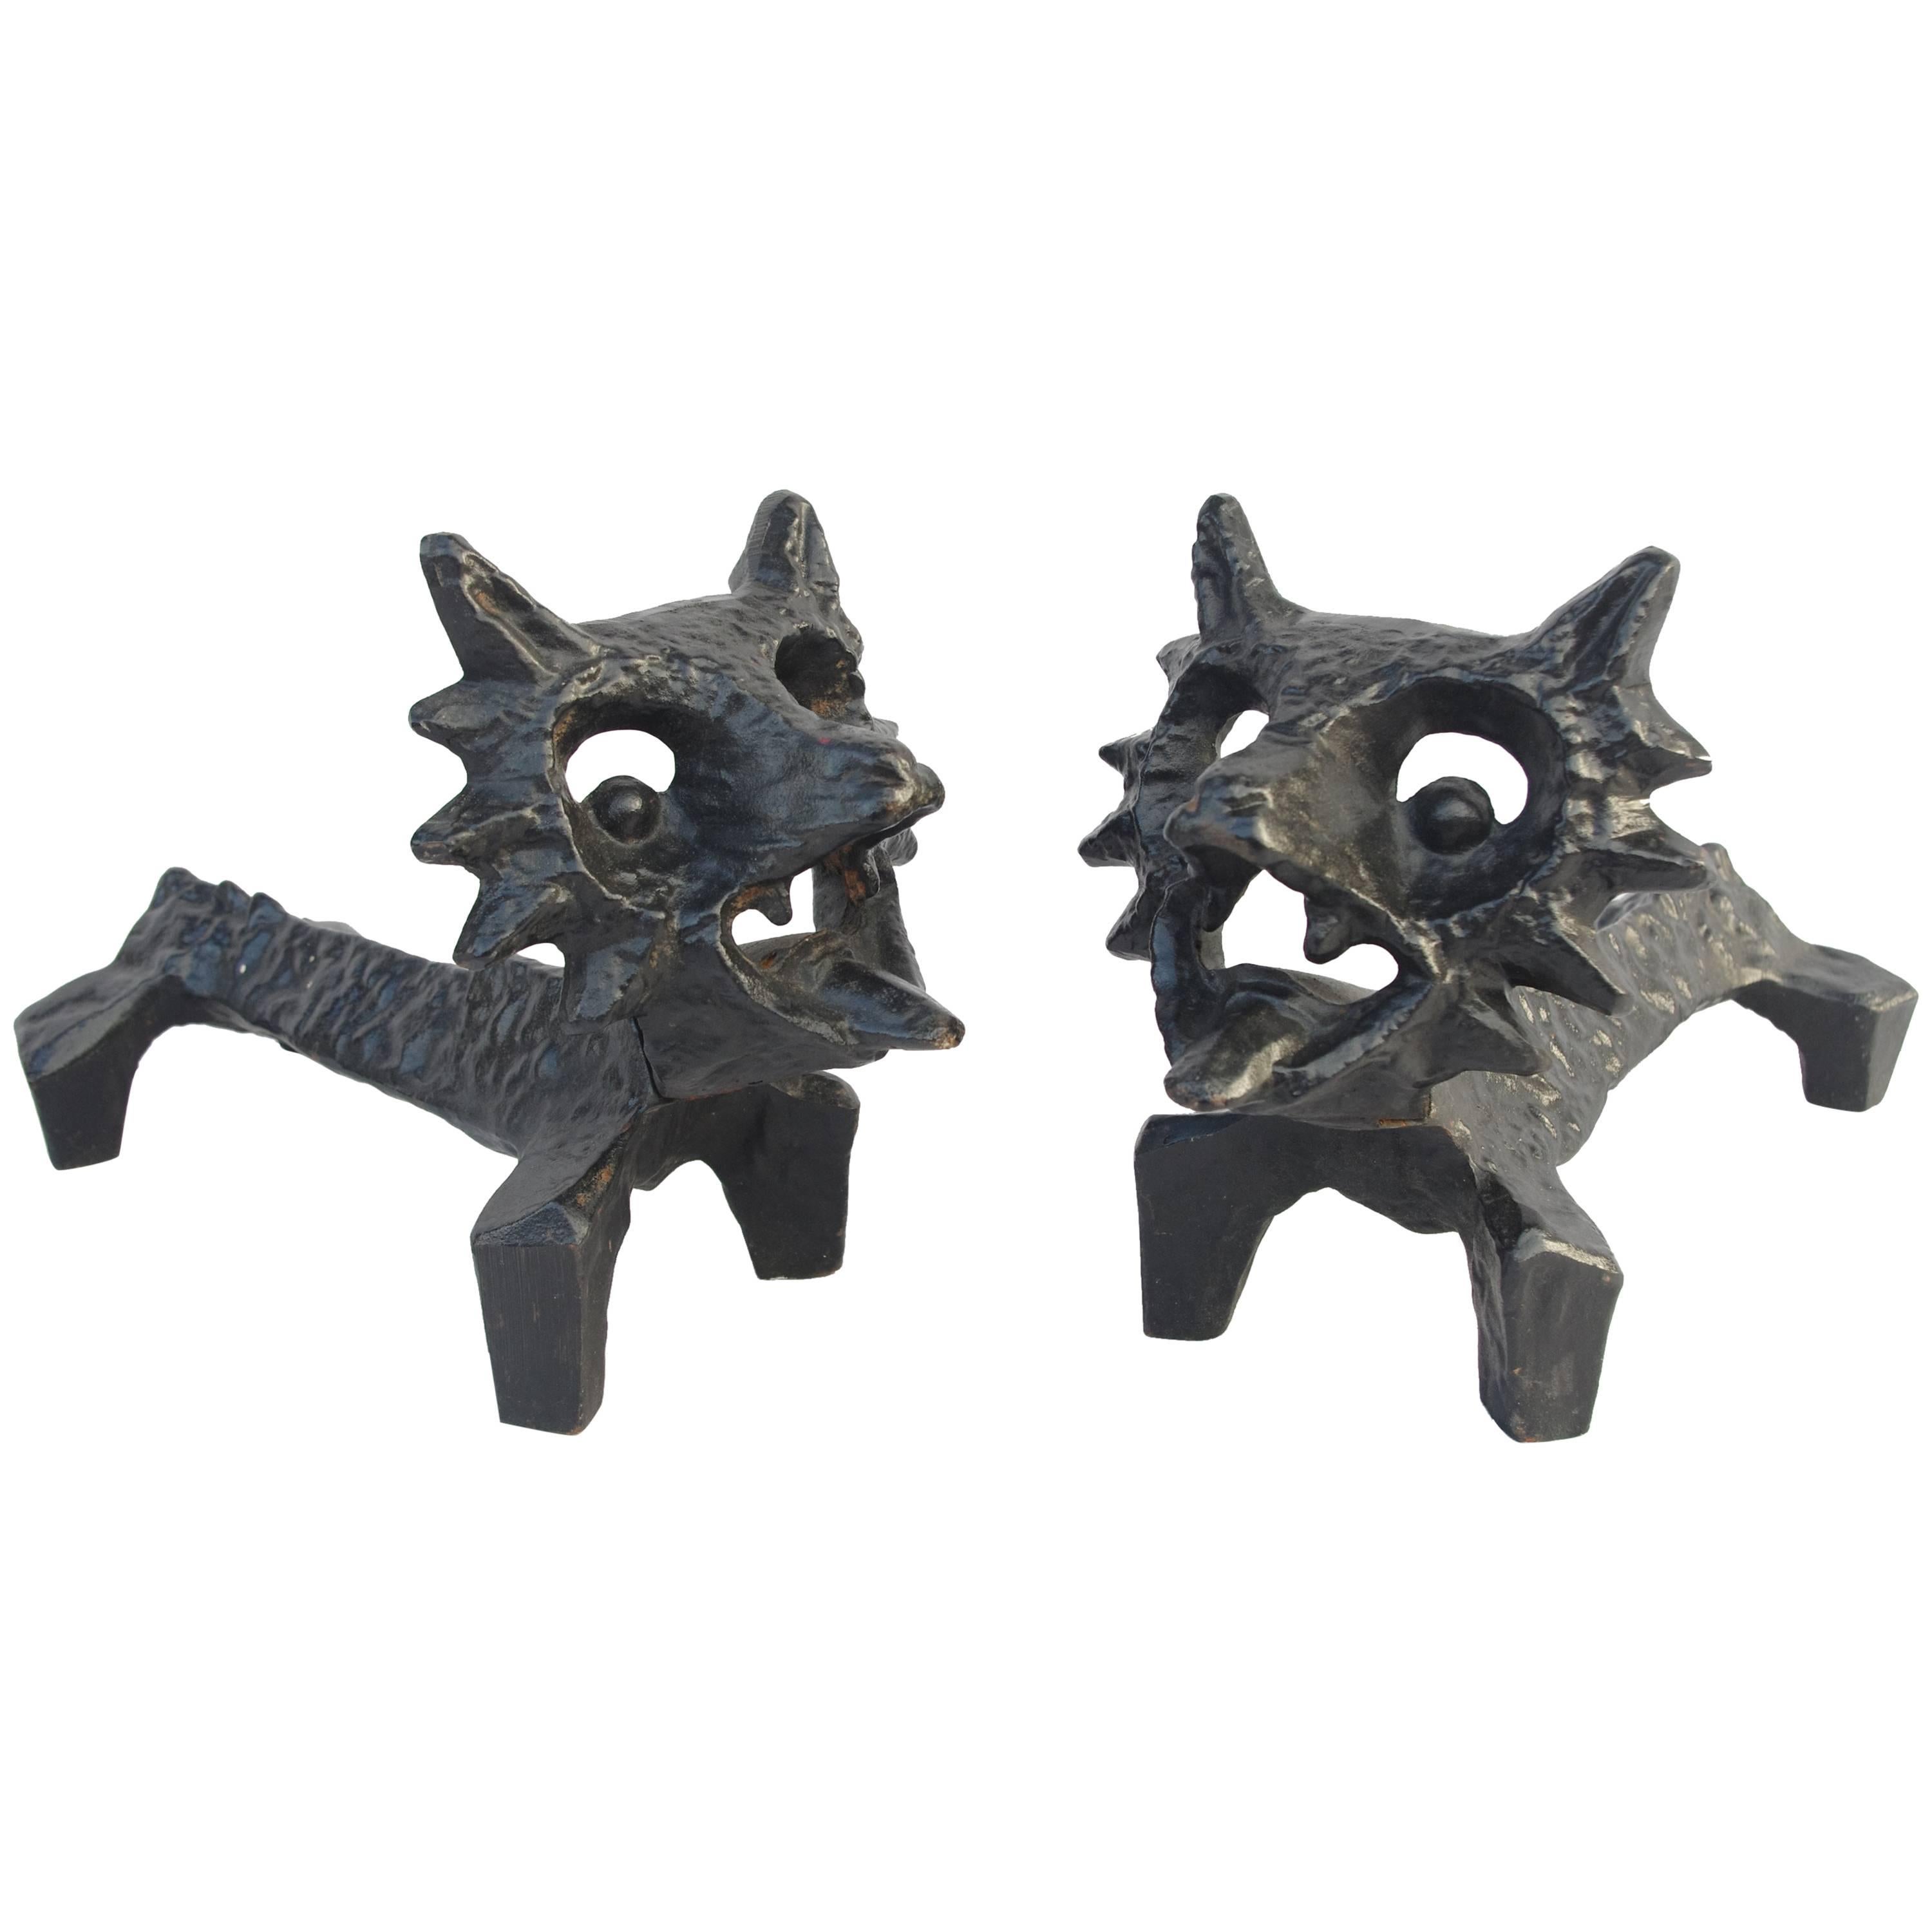 Pair of Foxes Sculpture, Cast Iron by Olle Hermansson